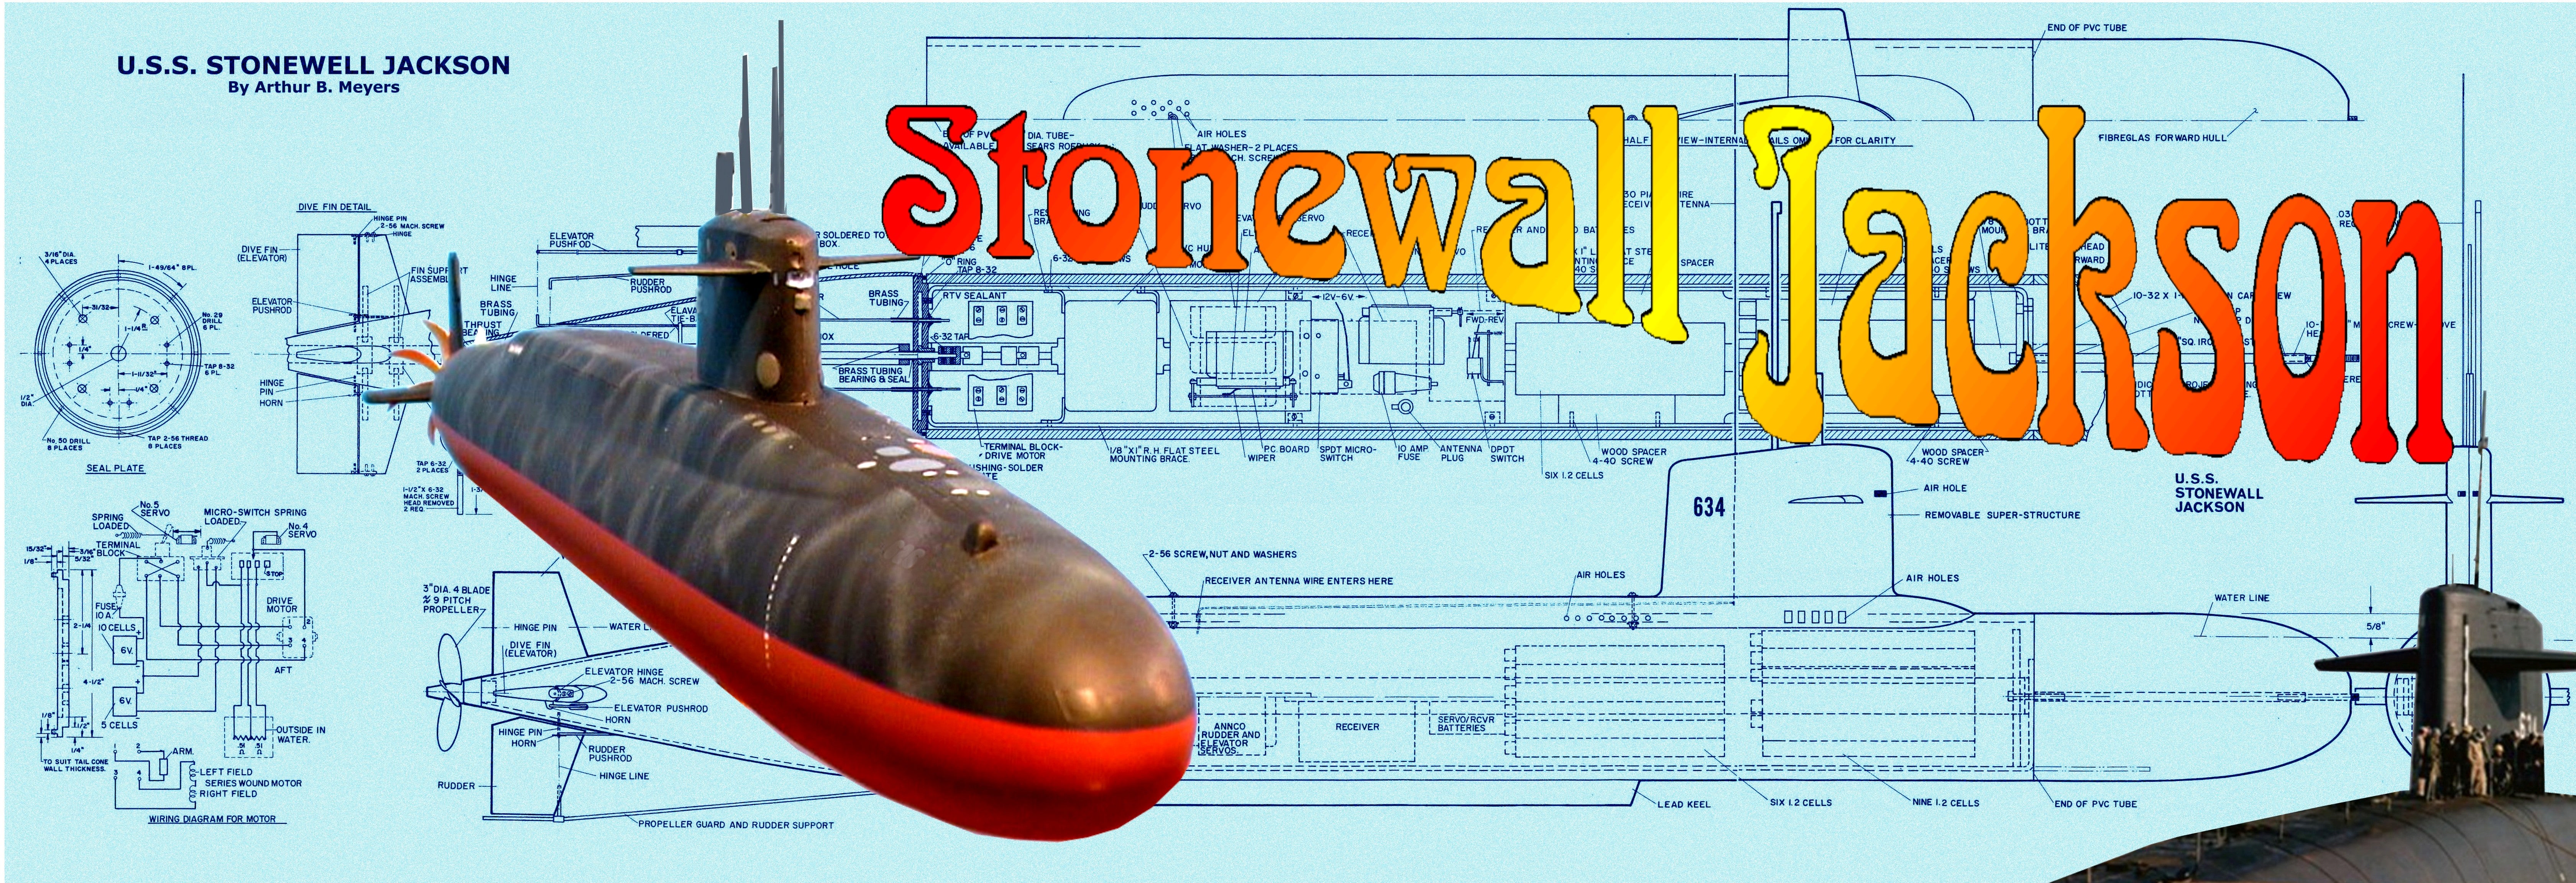 full size printed plans & build notes to build a semi scale 1:96 radio control submerging stonewall jackson submarine